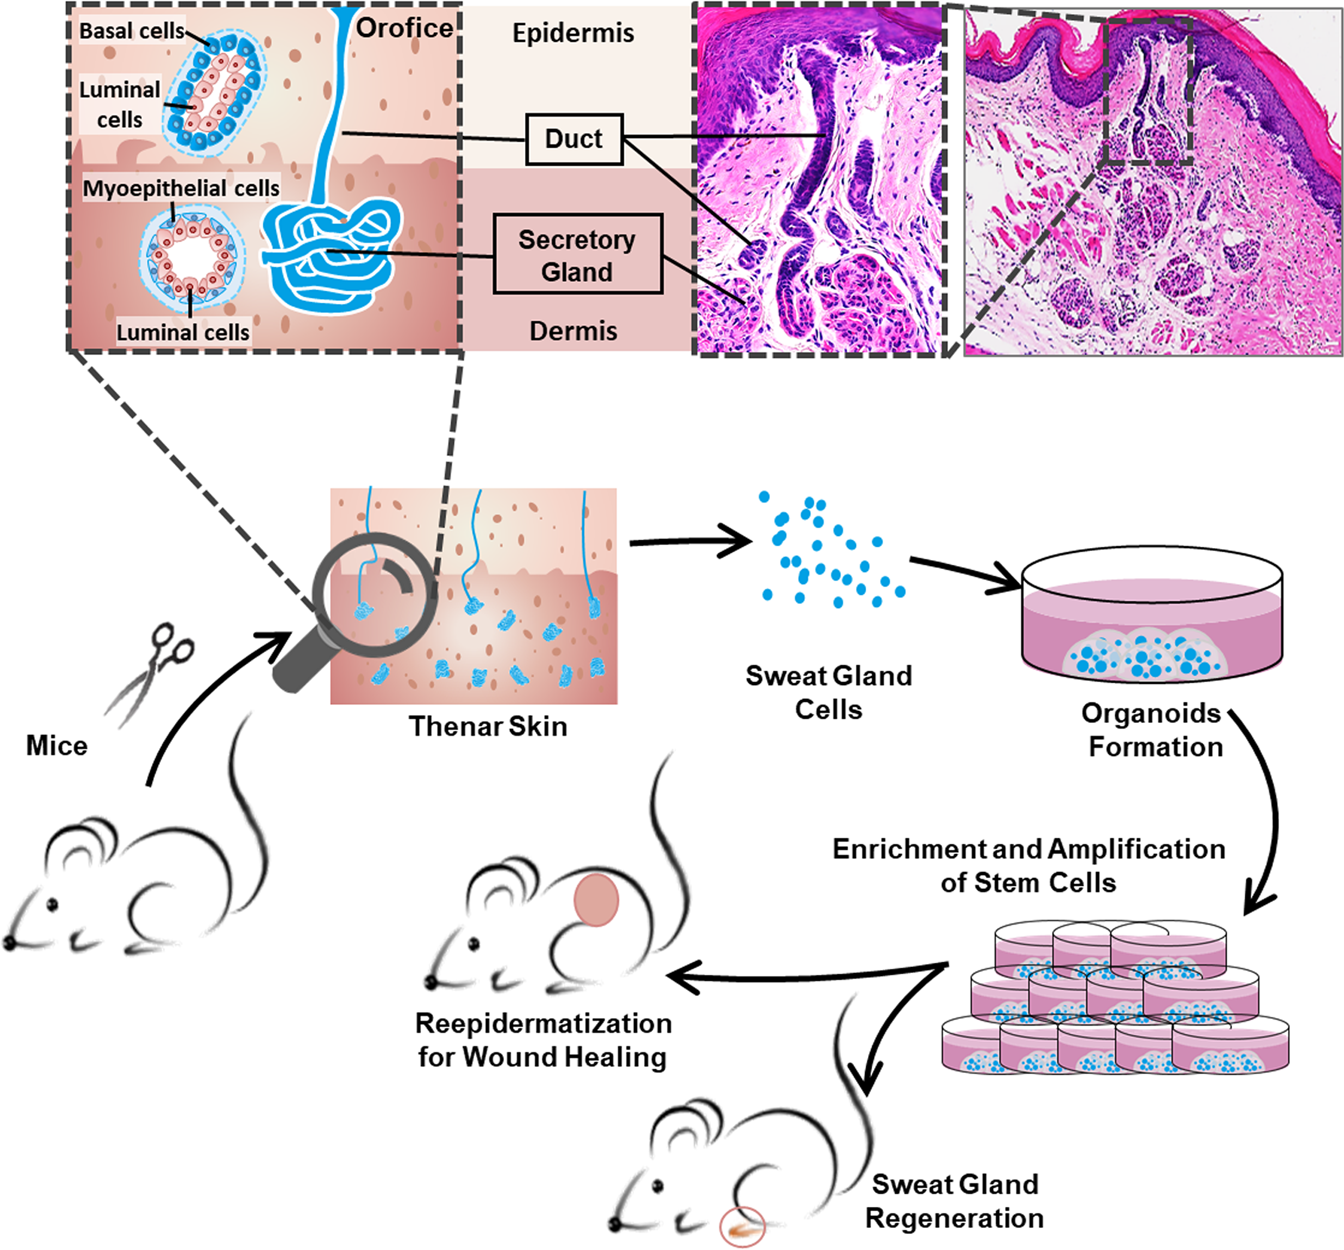 Sweat gland organoids contribute to cutaneous wound healing and sweat gland  regeneration | Cell Death & Disease